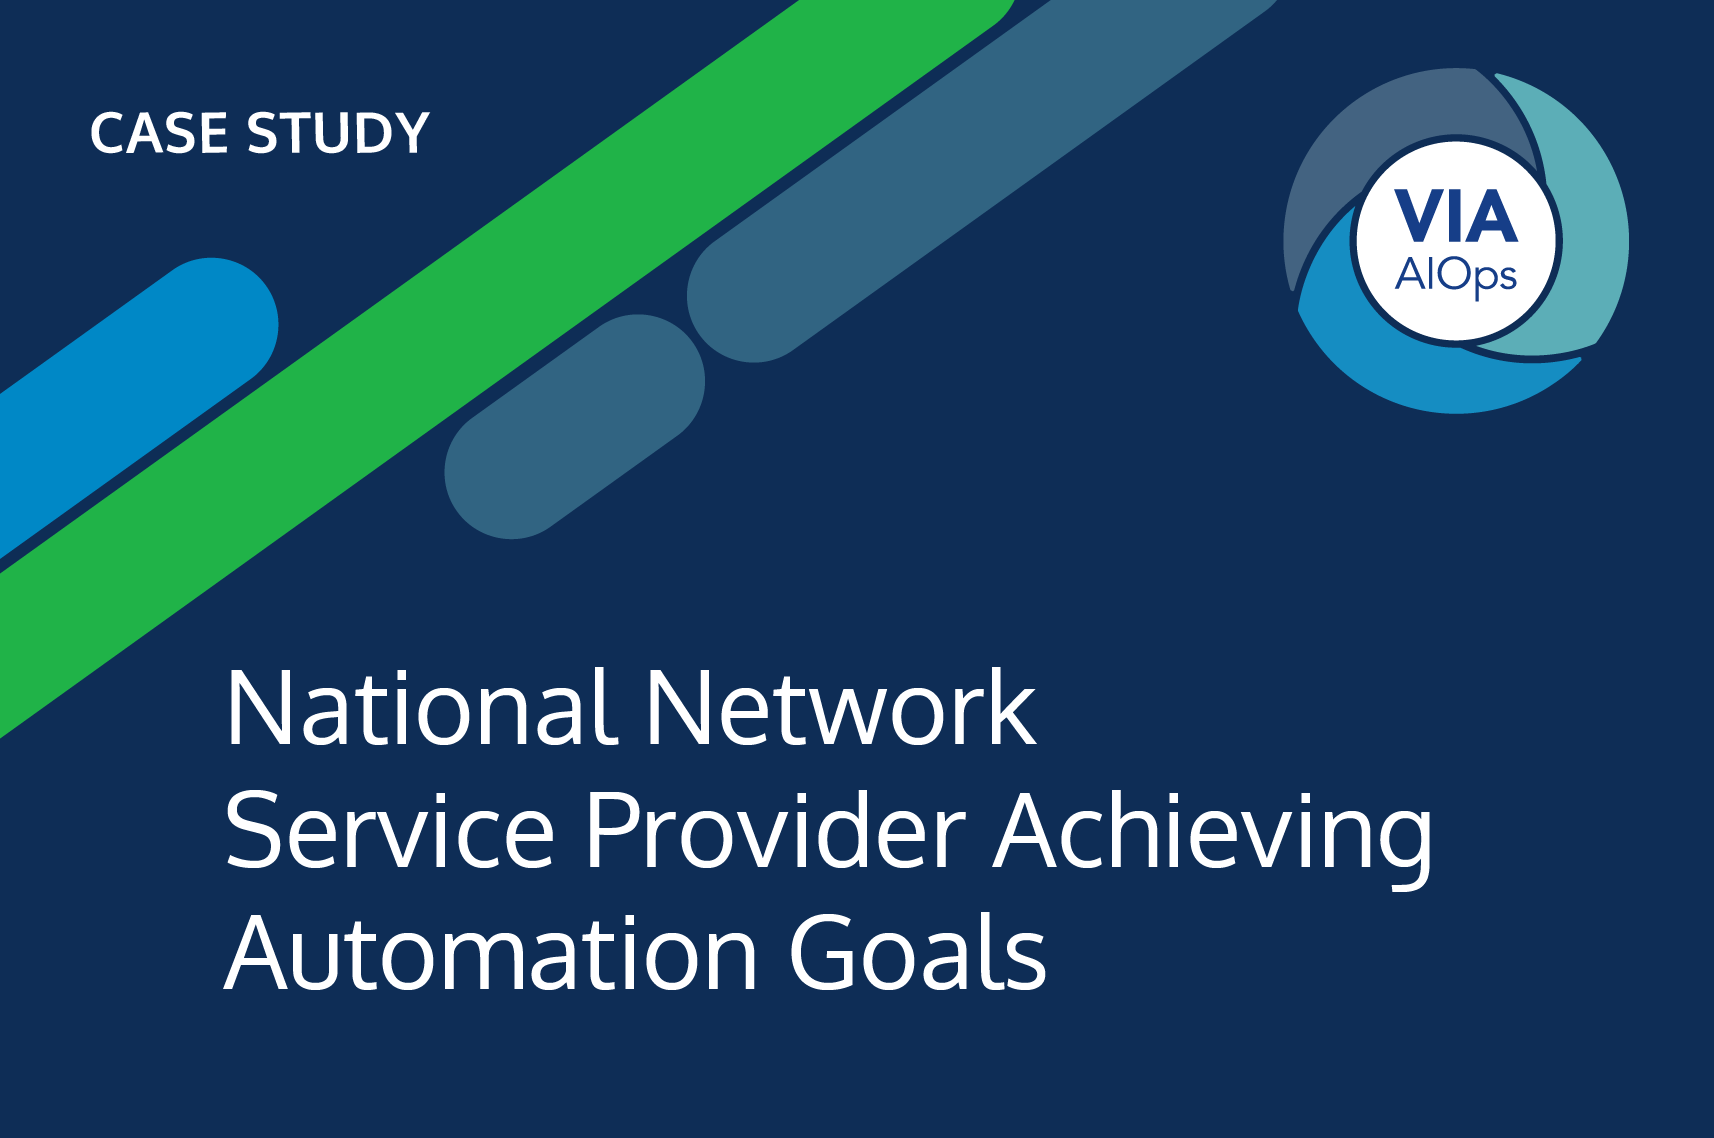 National Network Service Provider Achieving Automation Goals